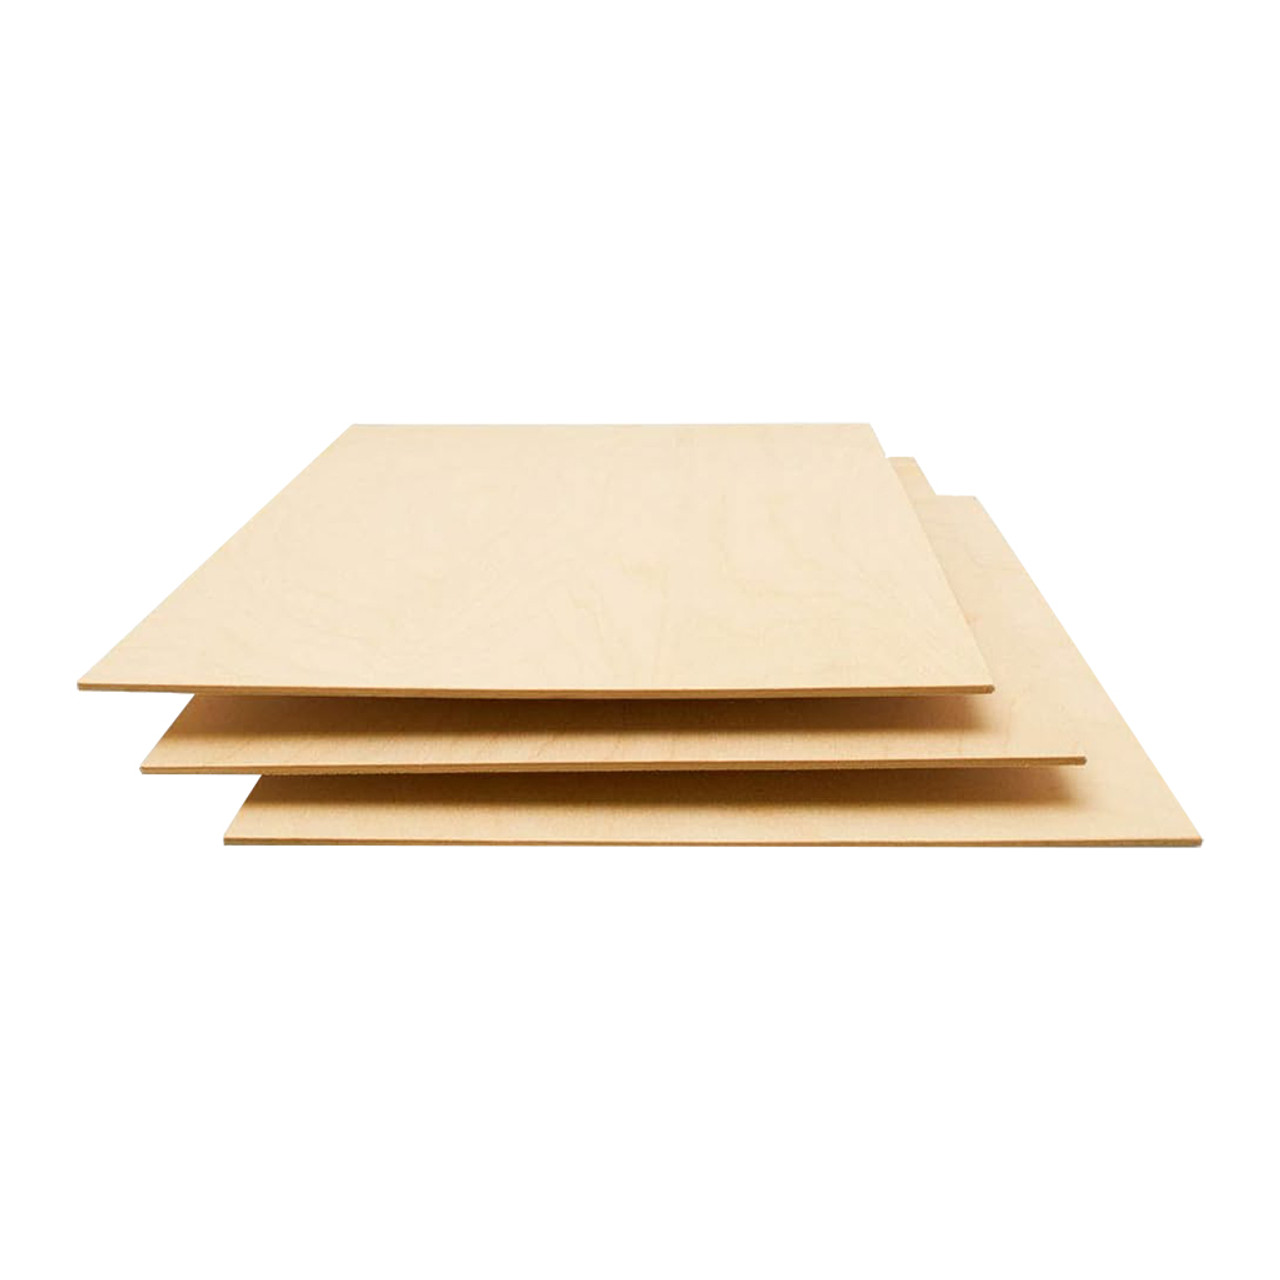 Midwest Products Co. Plywood 1/8 x 12 x 24 (6)